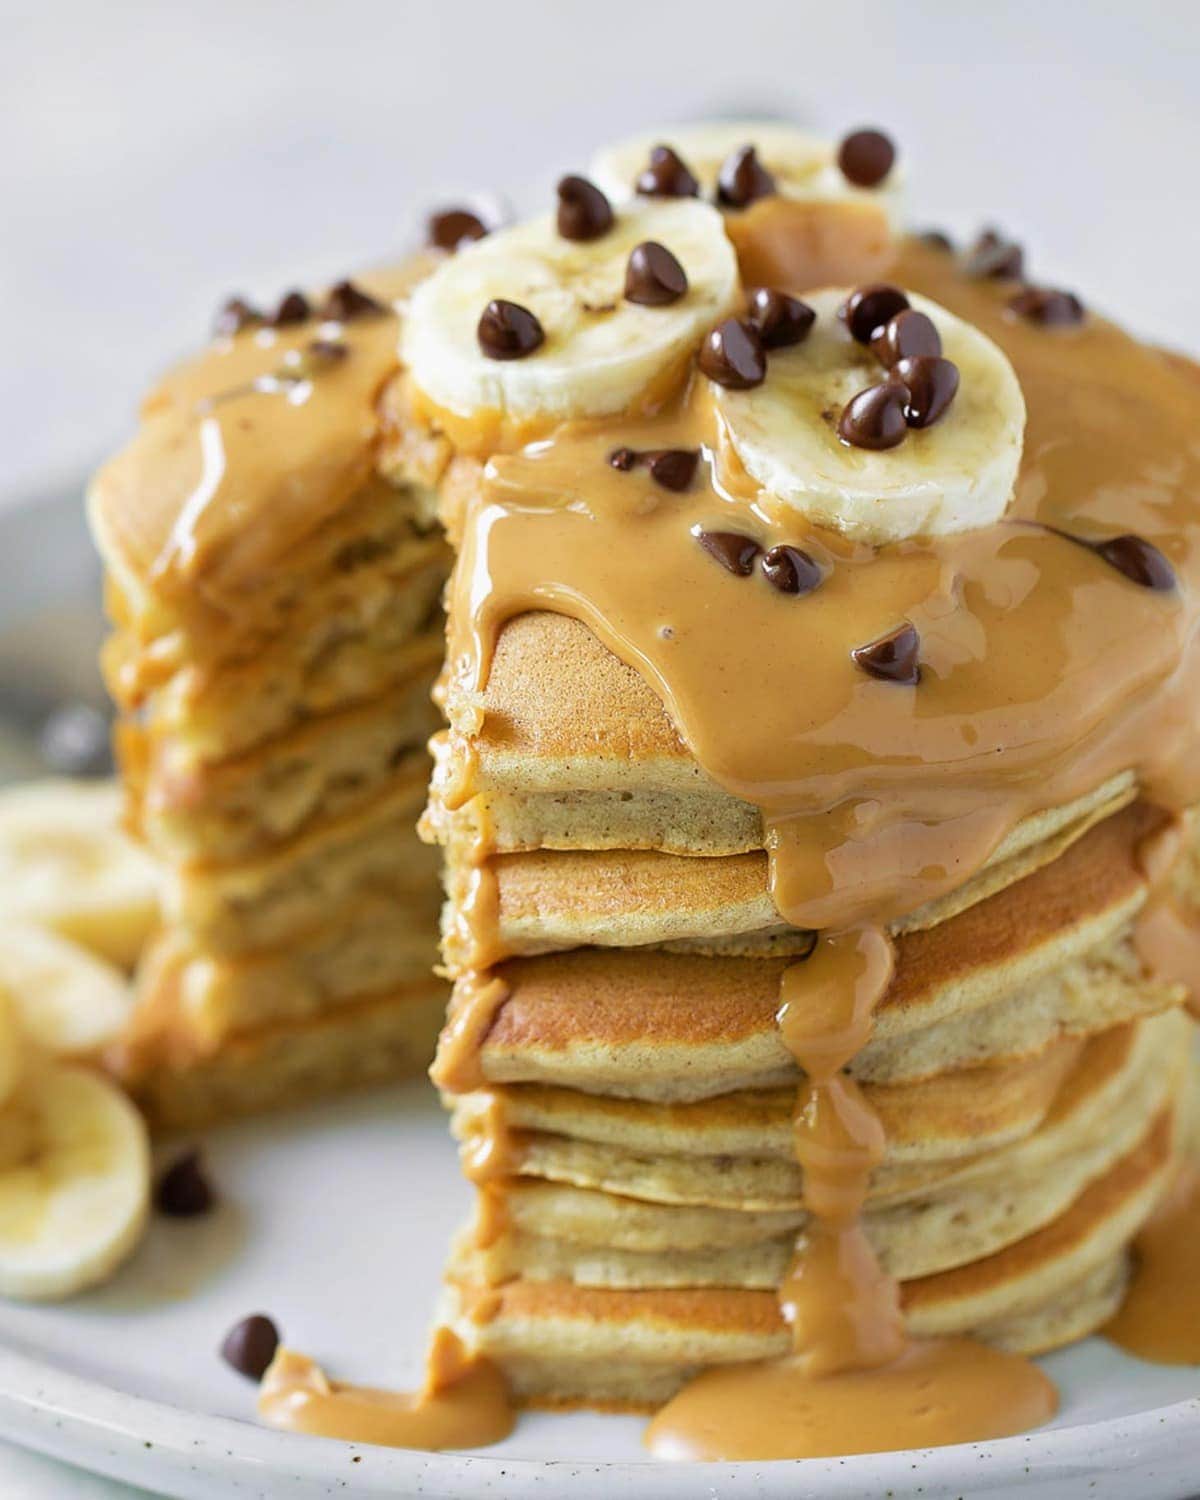 Easy pancake recipe - Peanut Butter Banana Pancakes stacked on a plate.